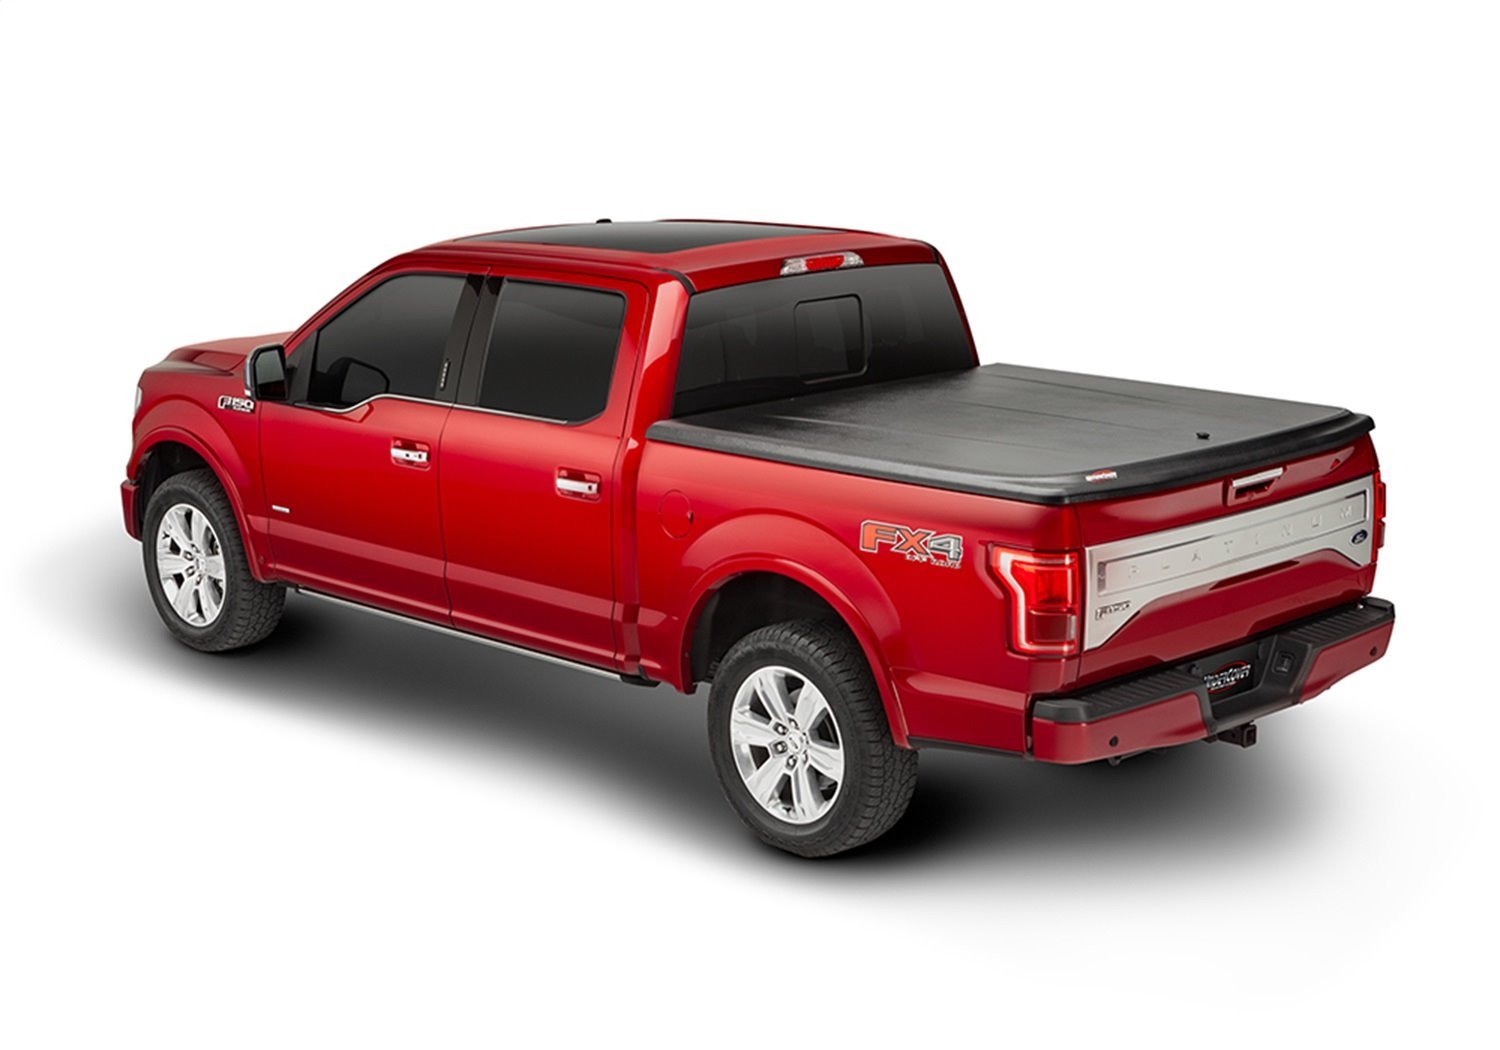 UC2228 Elite Hard Non-Folding Cover, Fits Select Ford F-250 6'10" Bed EXT/Crew Cab, Black Textured